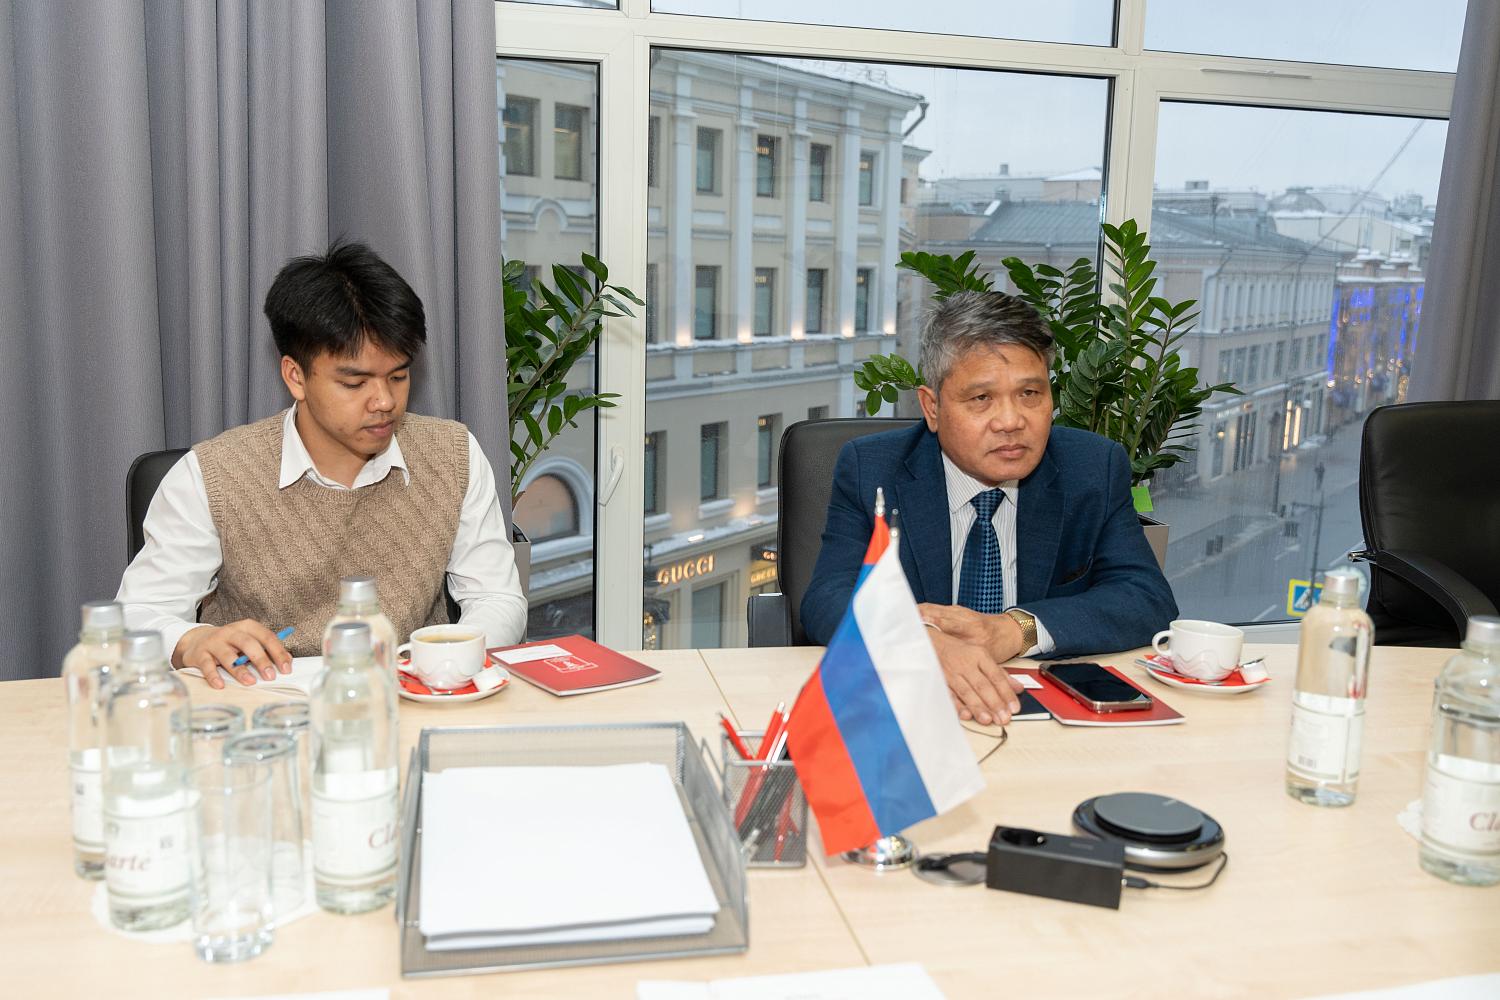 Moscow and Laos entrepreneurs have a mutual business interest